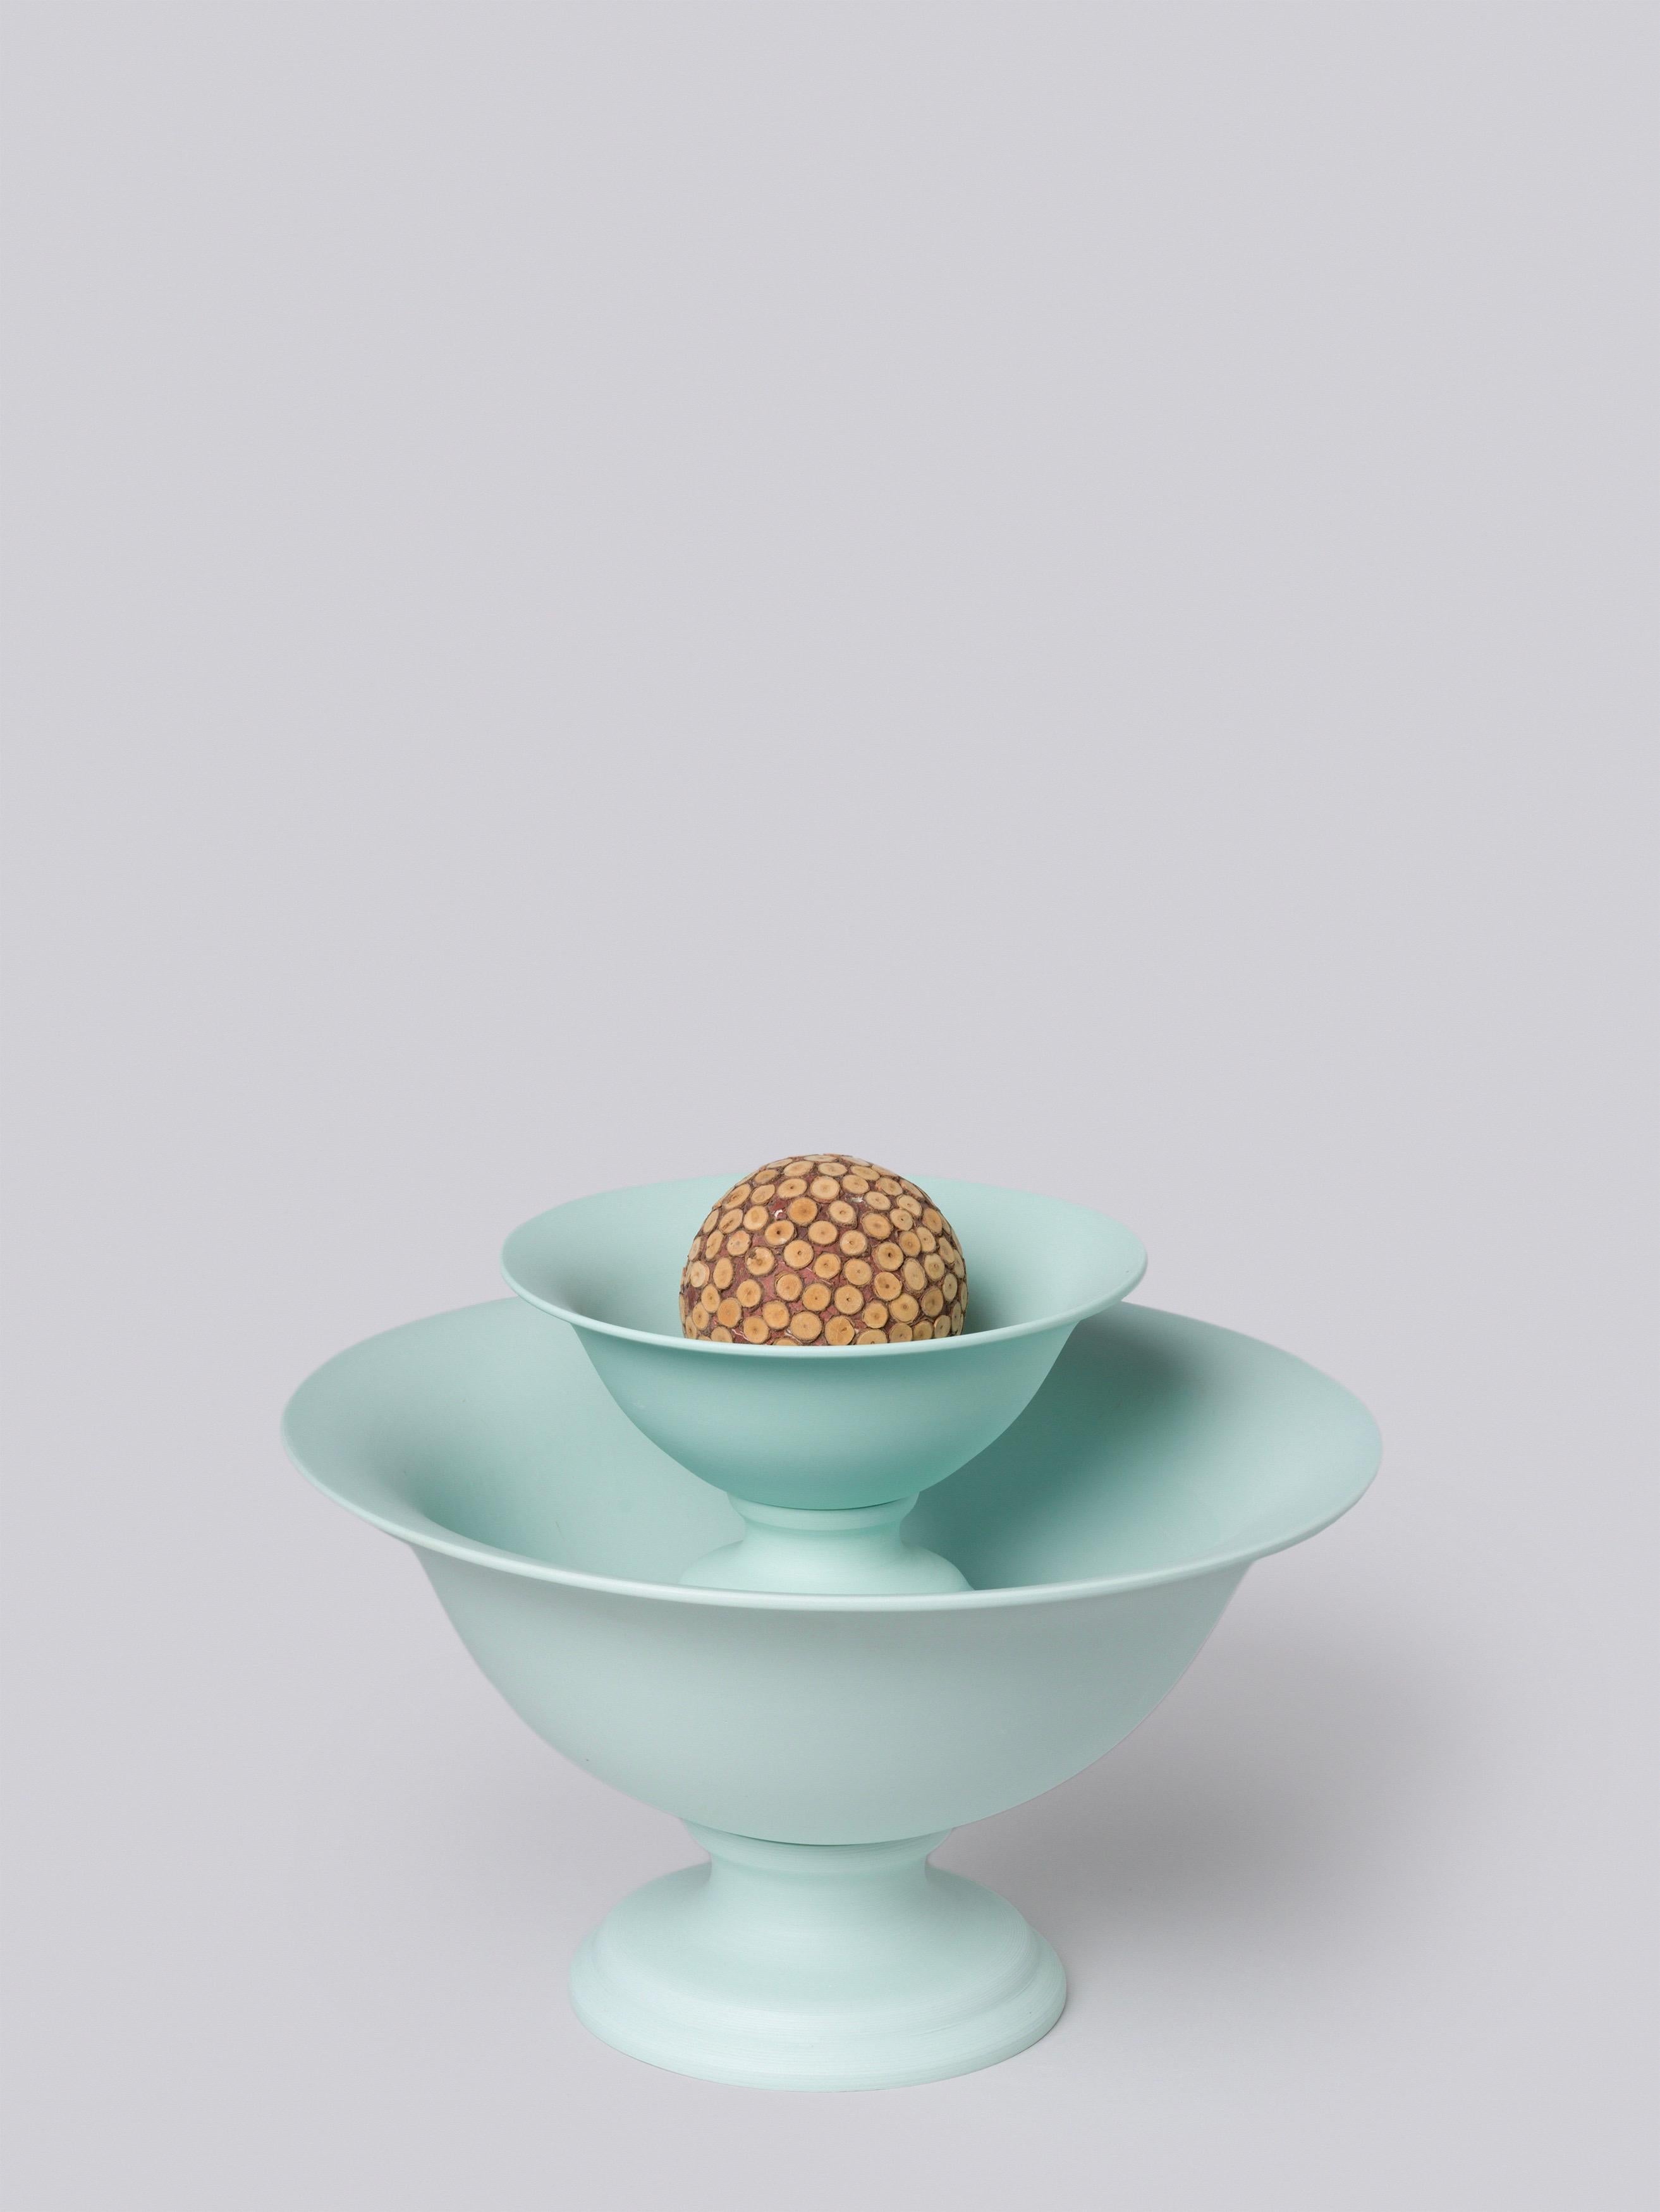 Molded Small Footed Porcelain Vaso Planter in Matte Mint Green